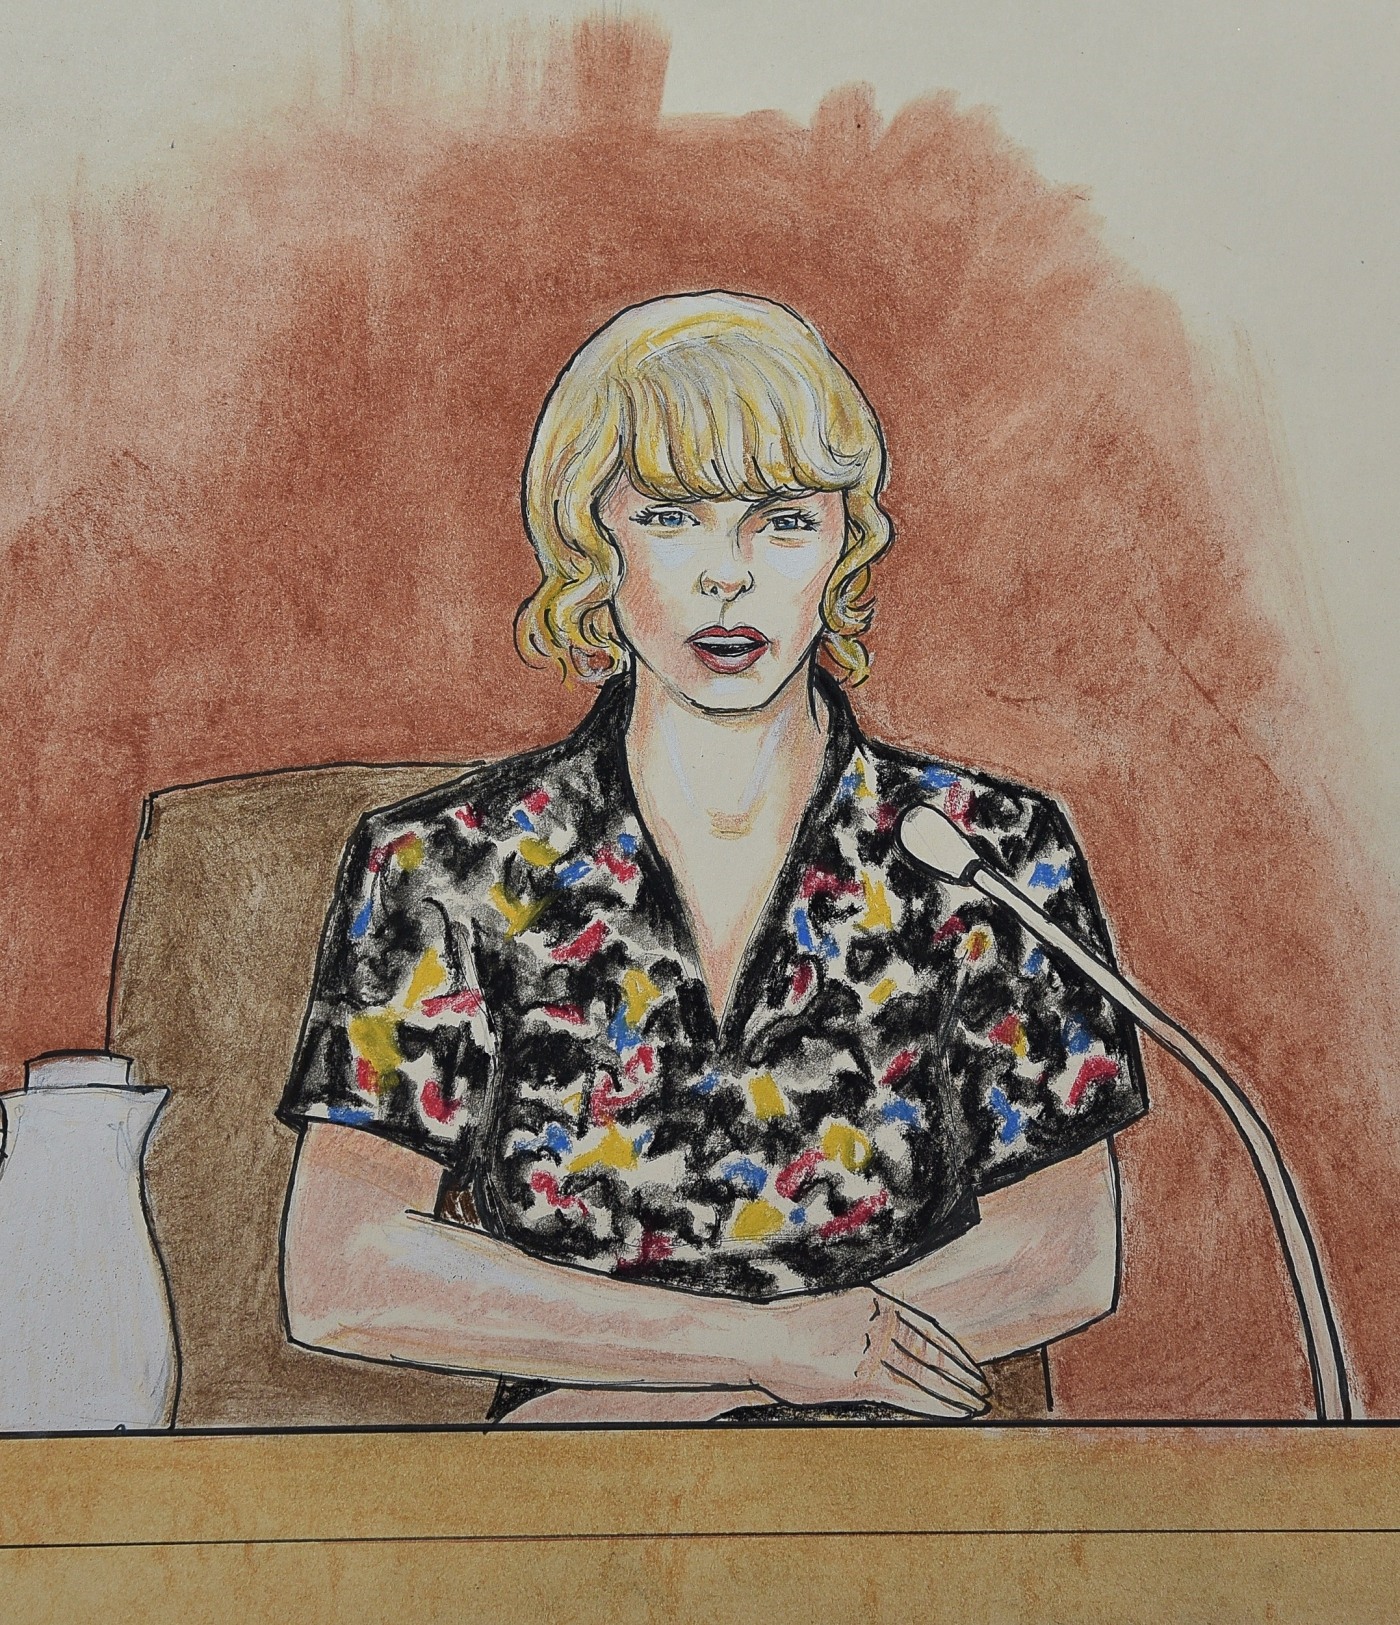 Taylor Swift takes the stand during 'Groping' trial